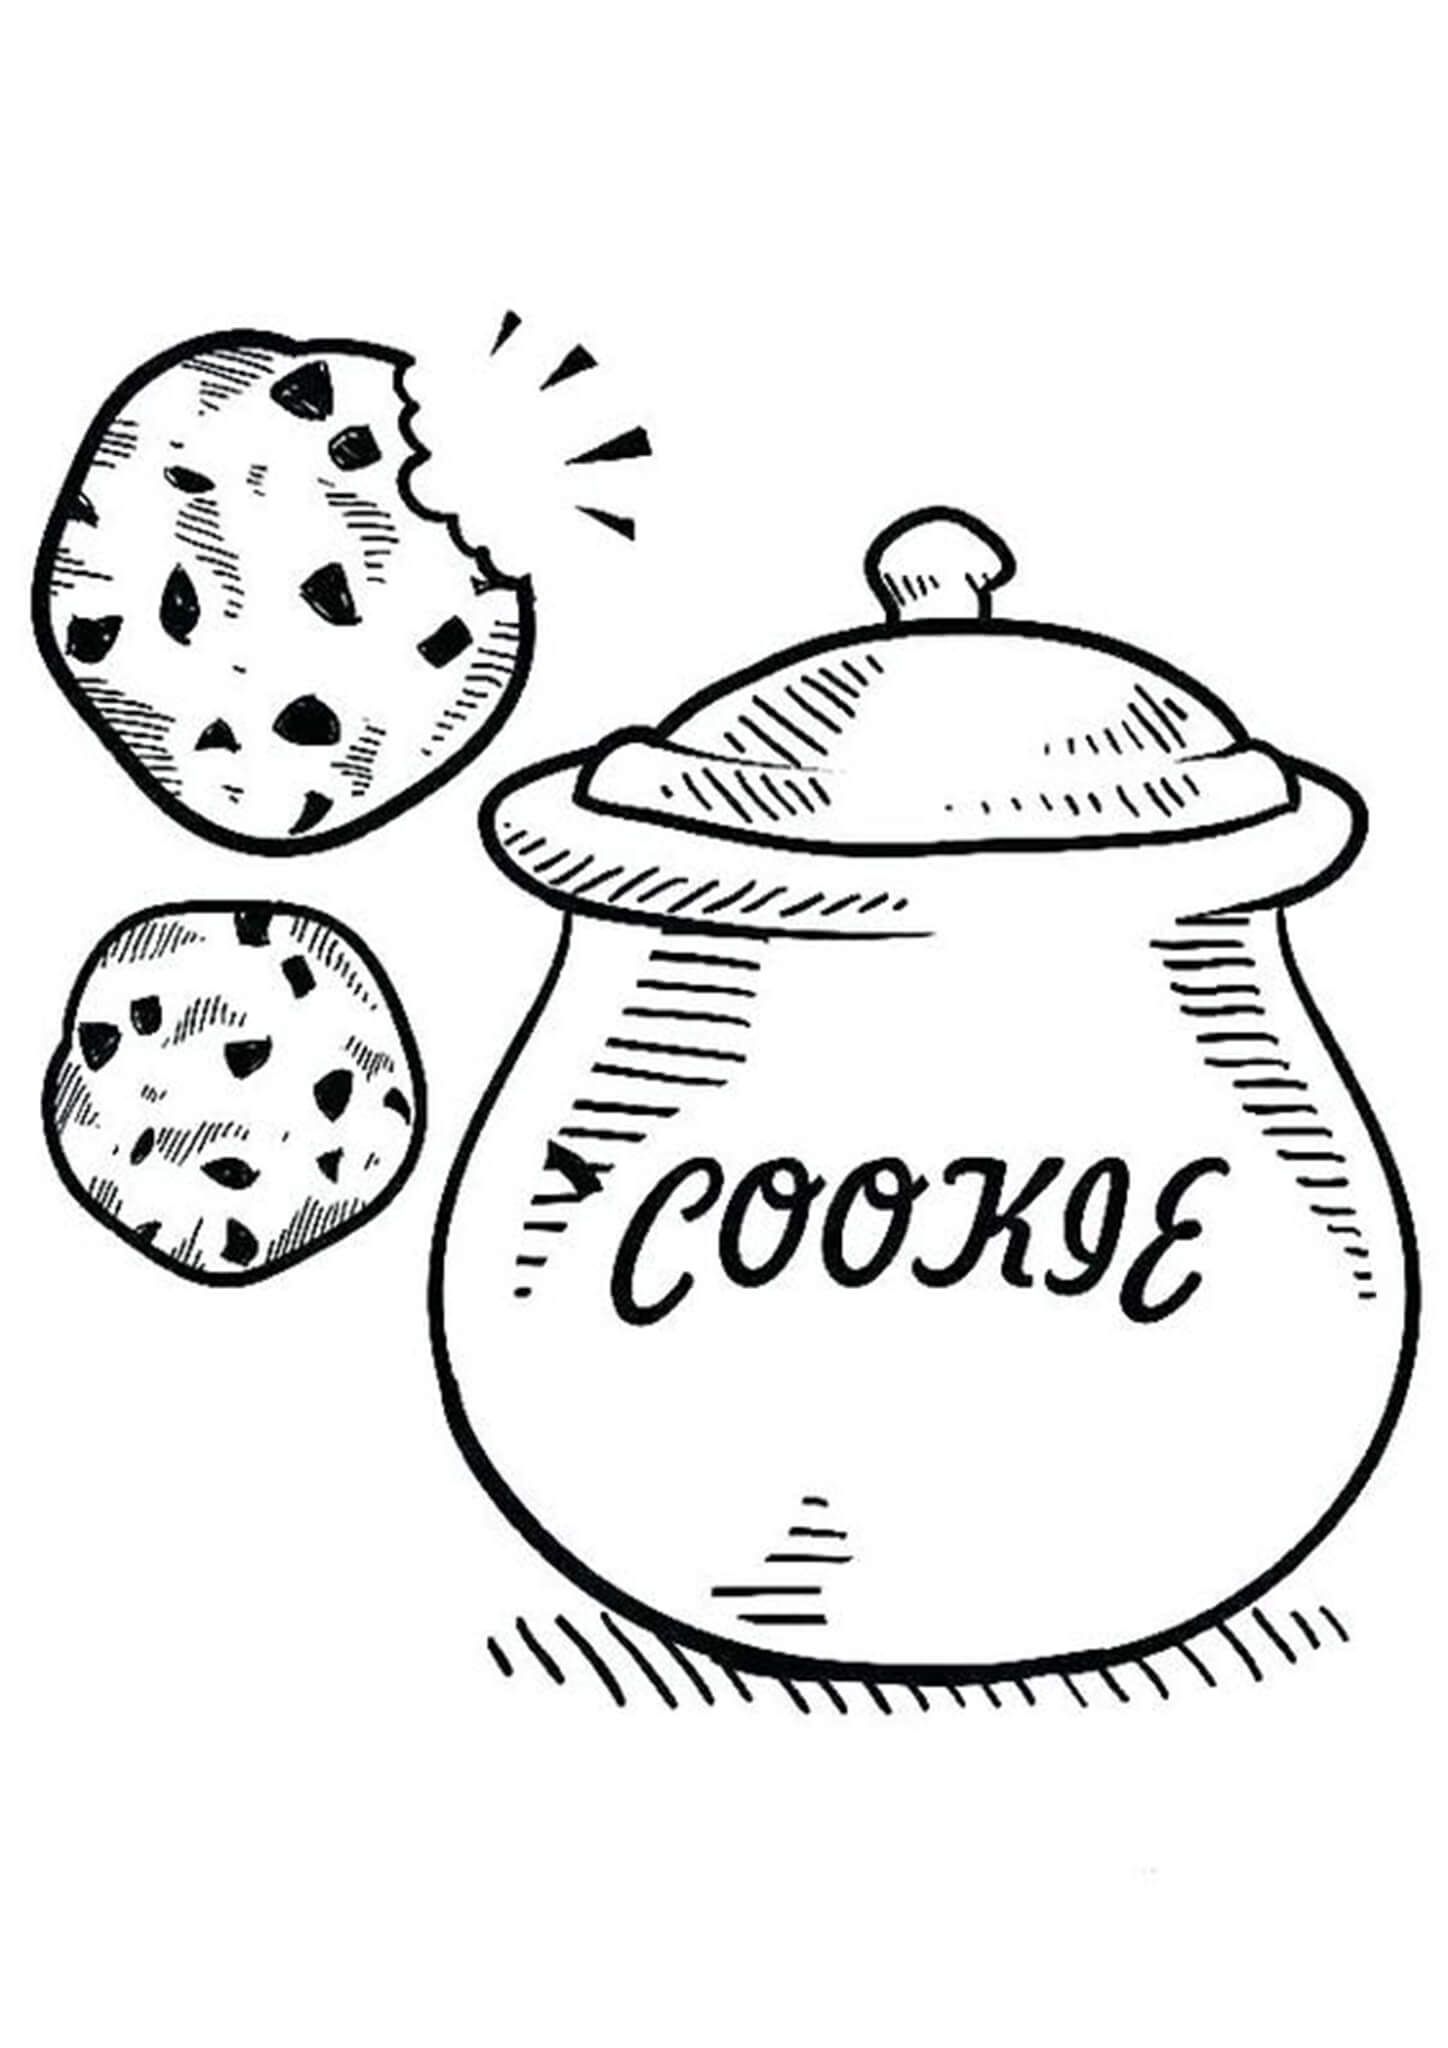 Freee Cookie Coloring Pages Pdf For Kids - Coloringfolder.com